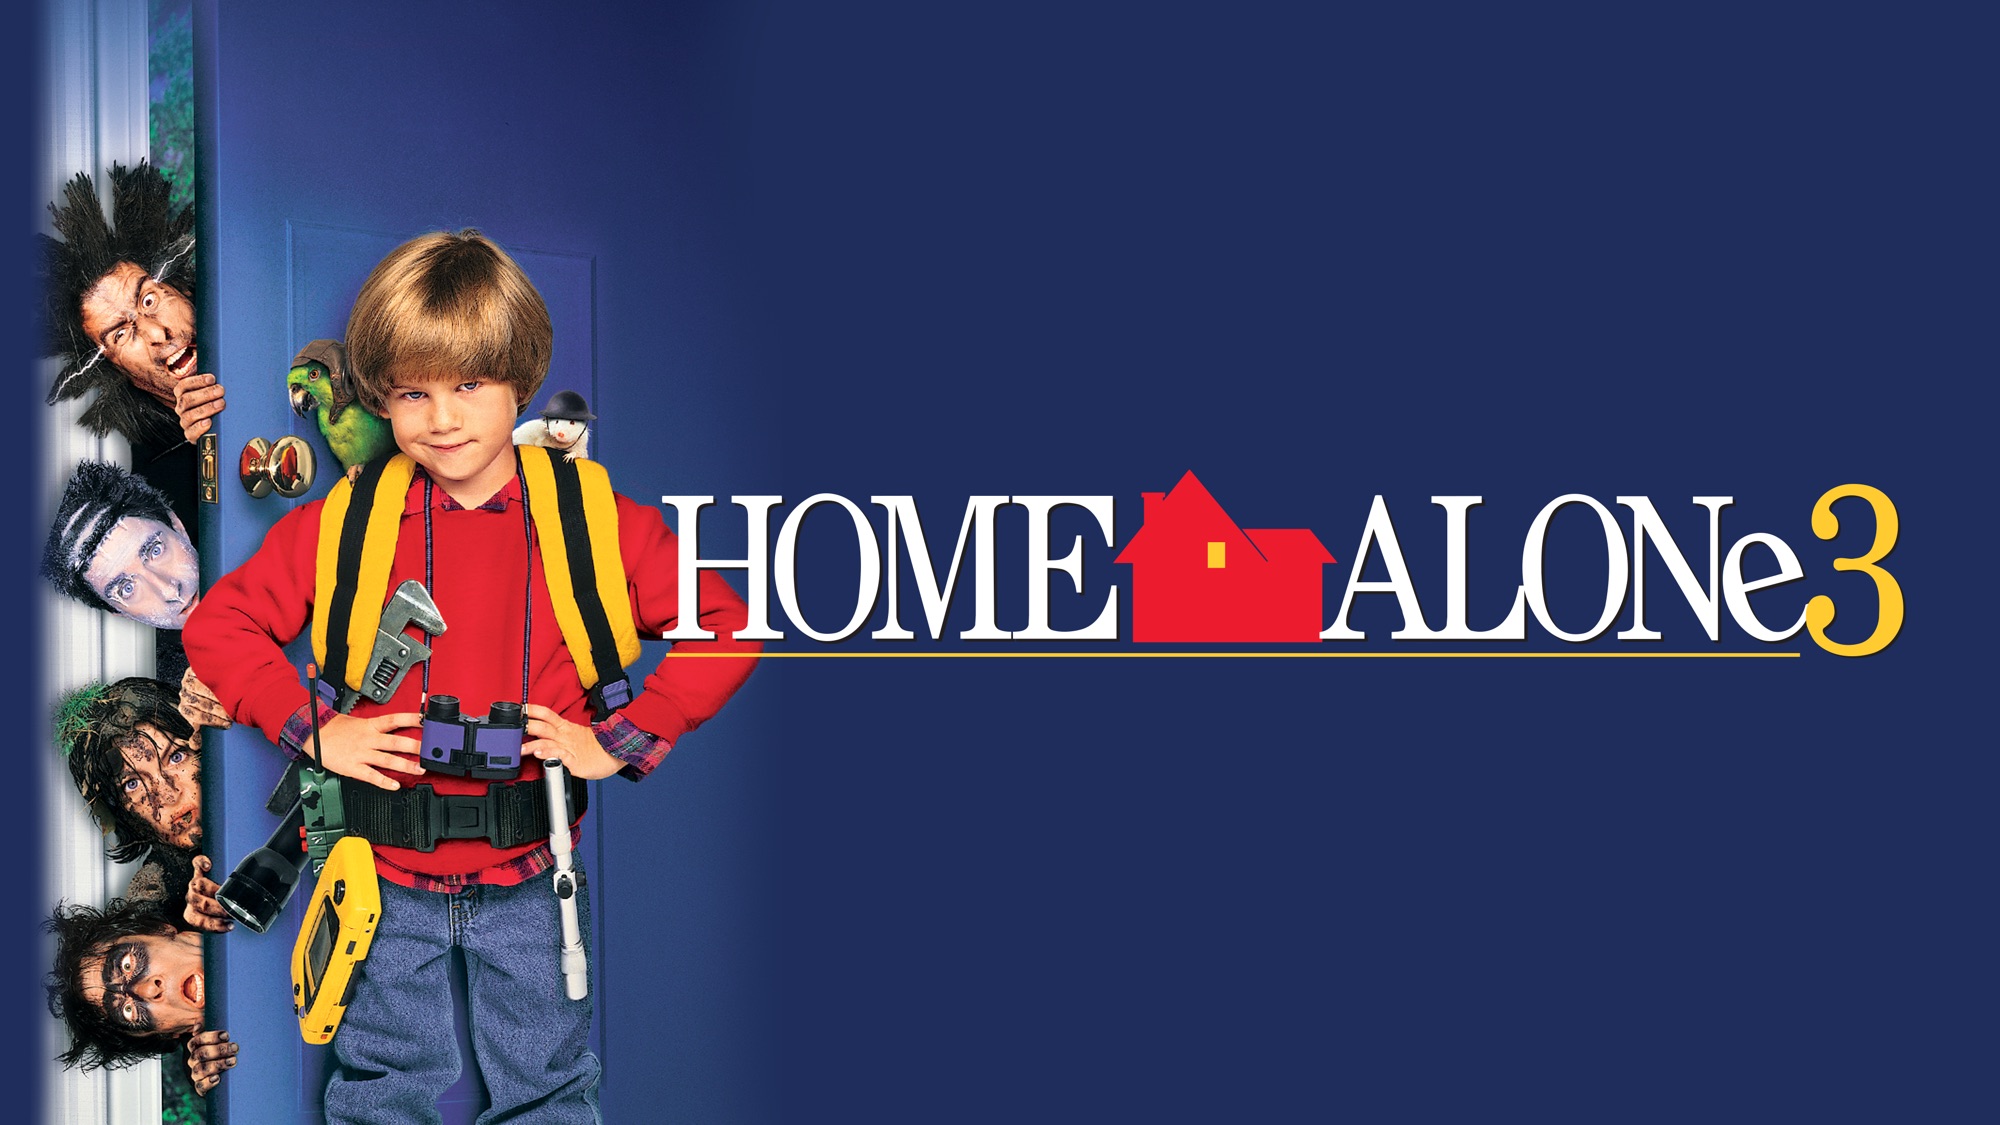 Movie Home Alone 3 HD Wallpaper | Background Image